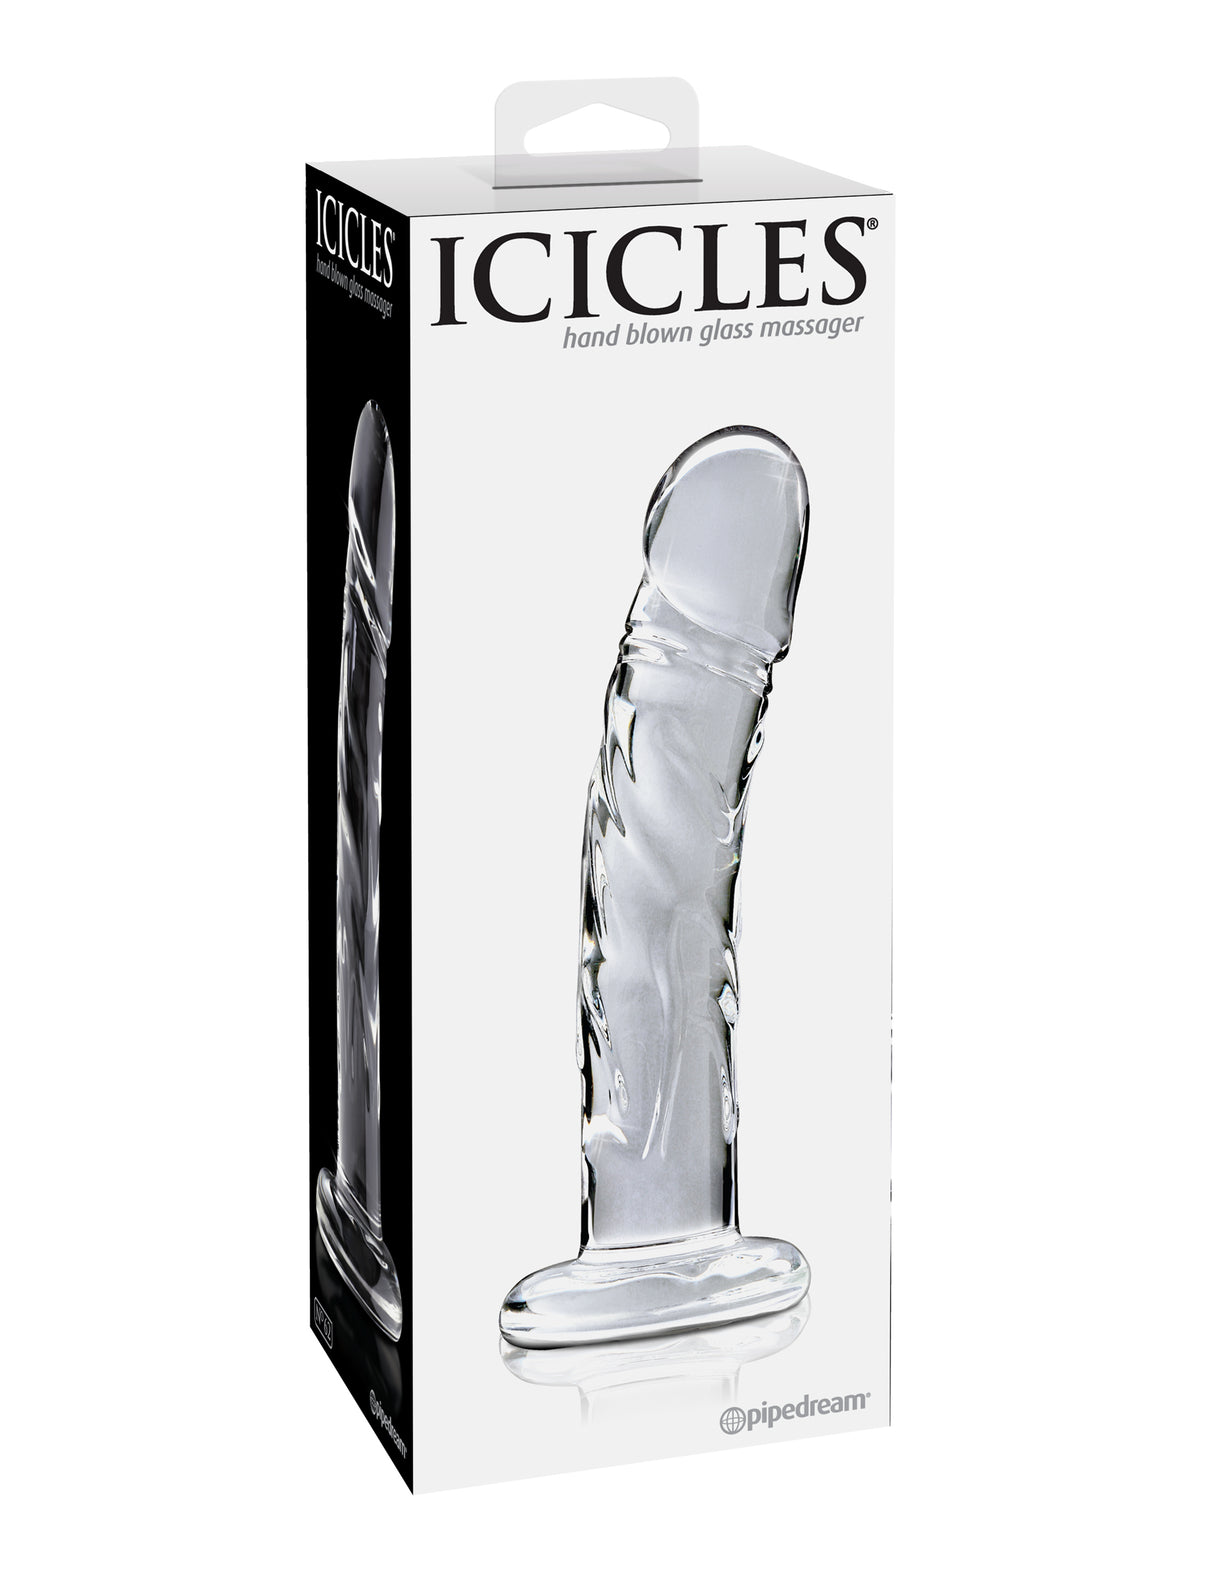 Icicles #62 Intimates Adult Boutique